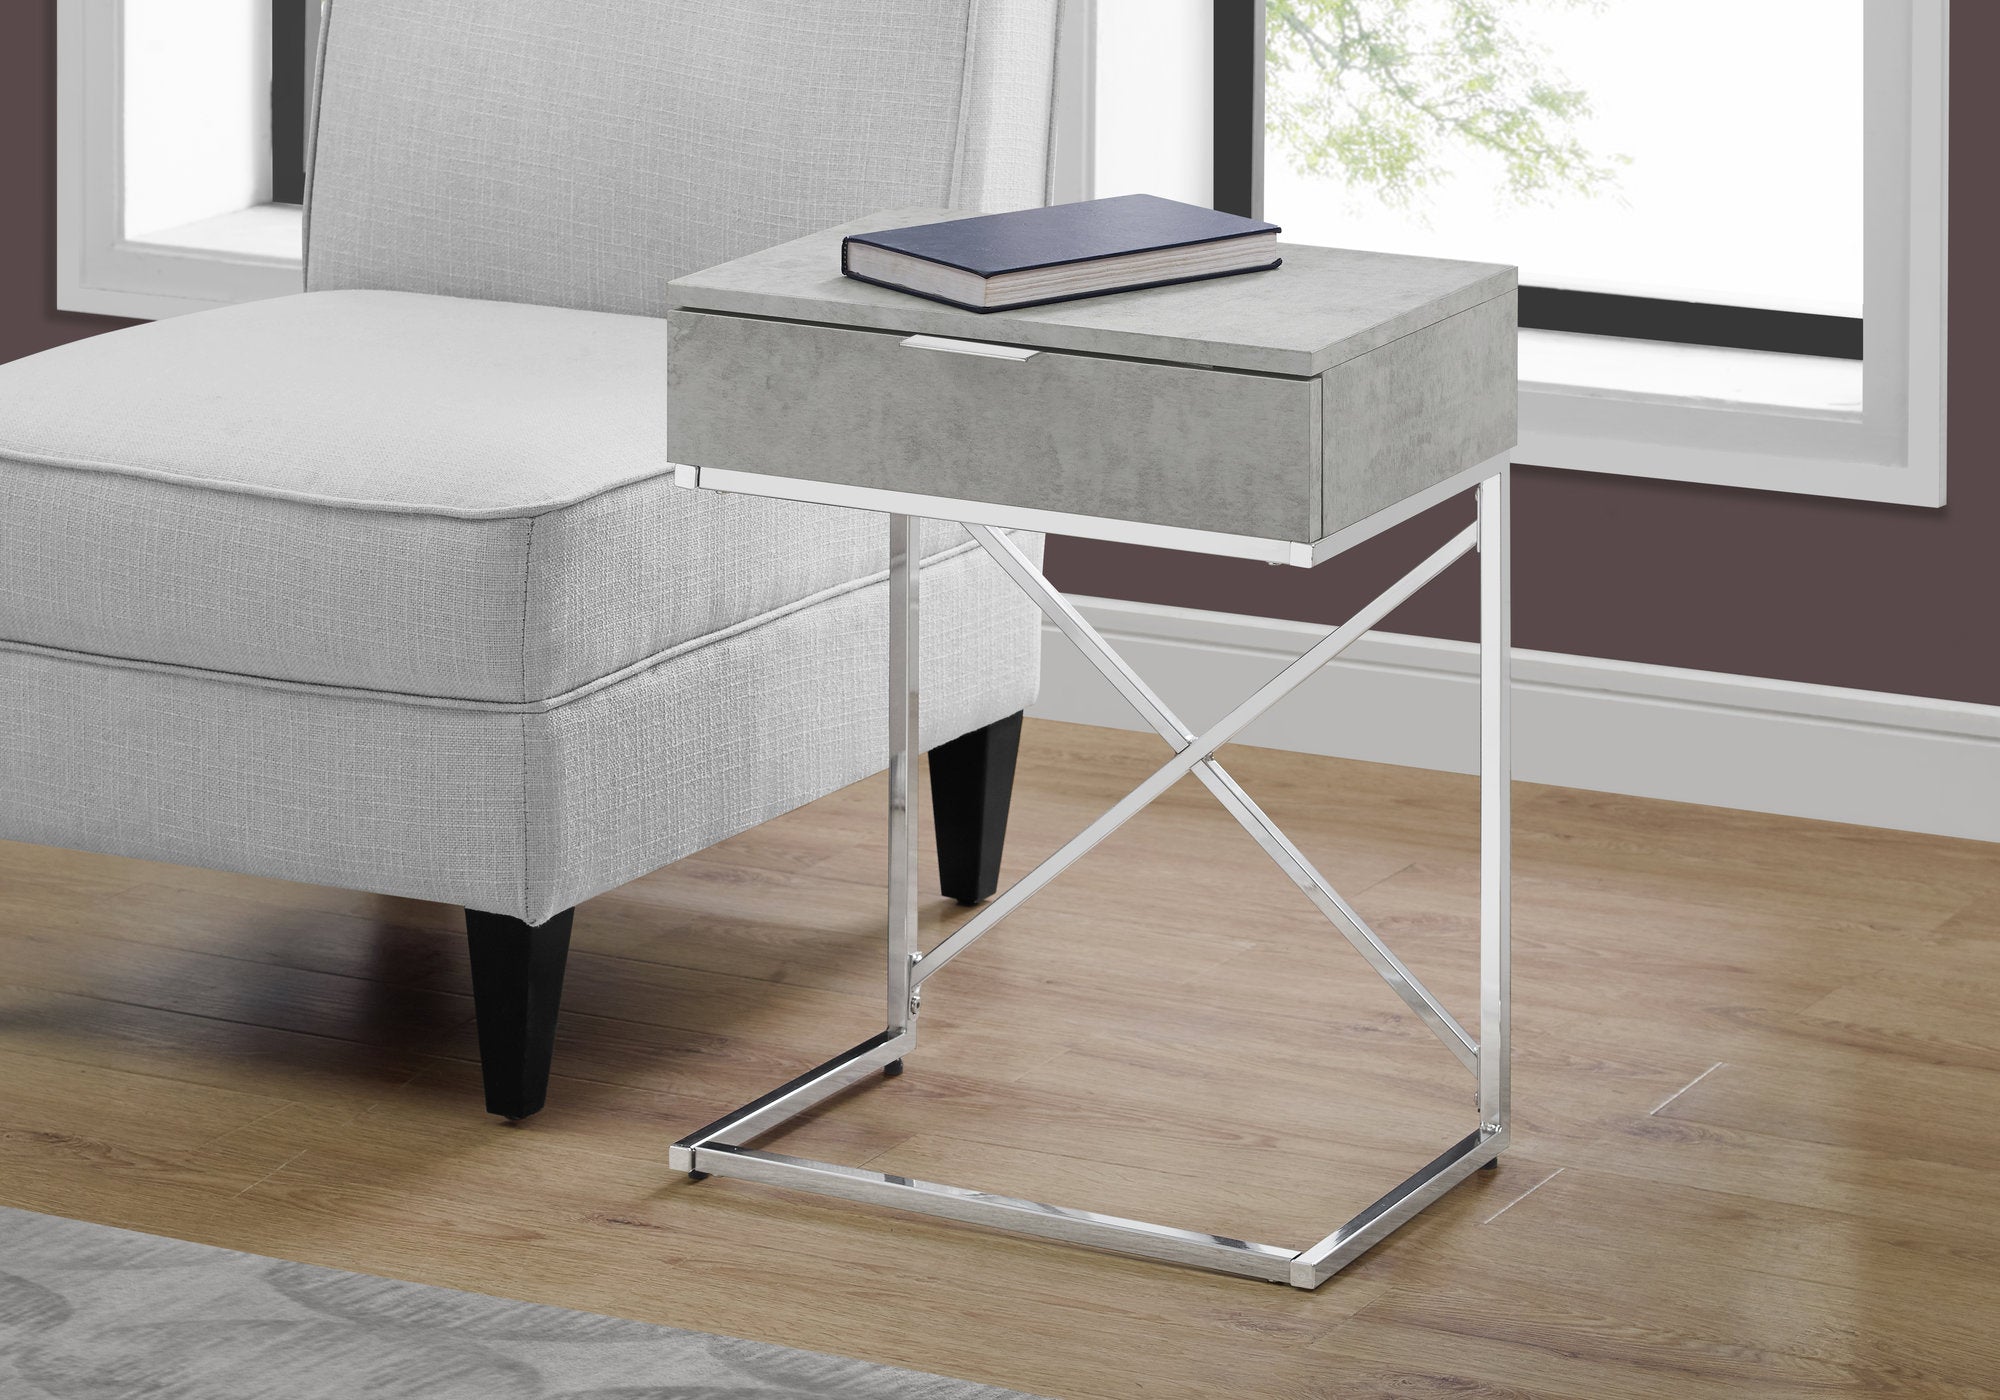 MN-813471    Accent Table, Side, End, Nightstand, Lamp, Living Room, Bedroom, Metal Legs, Laminate, Grey Cement Look, Chrome, Contemporary, Modern